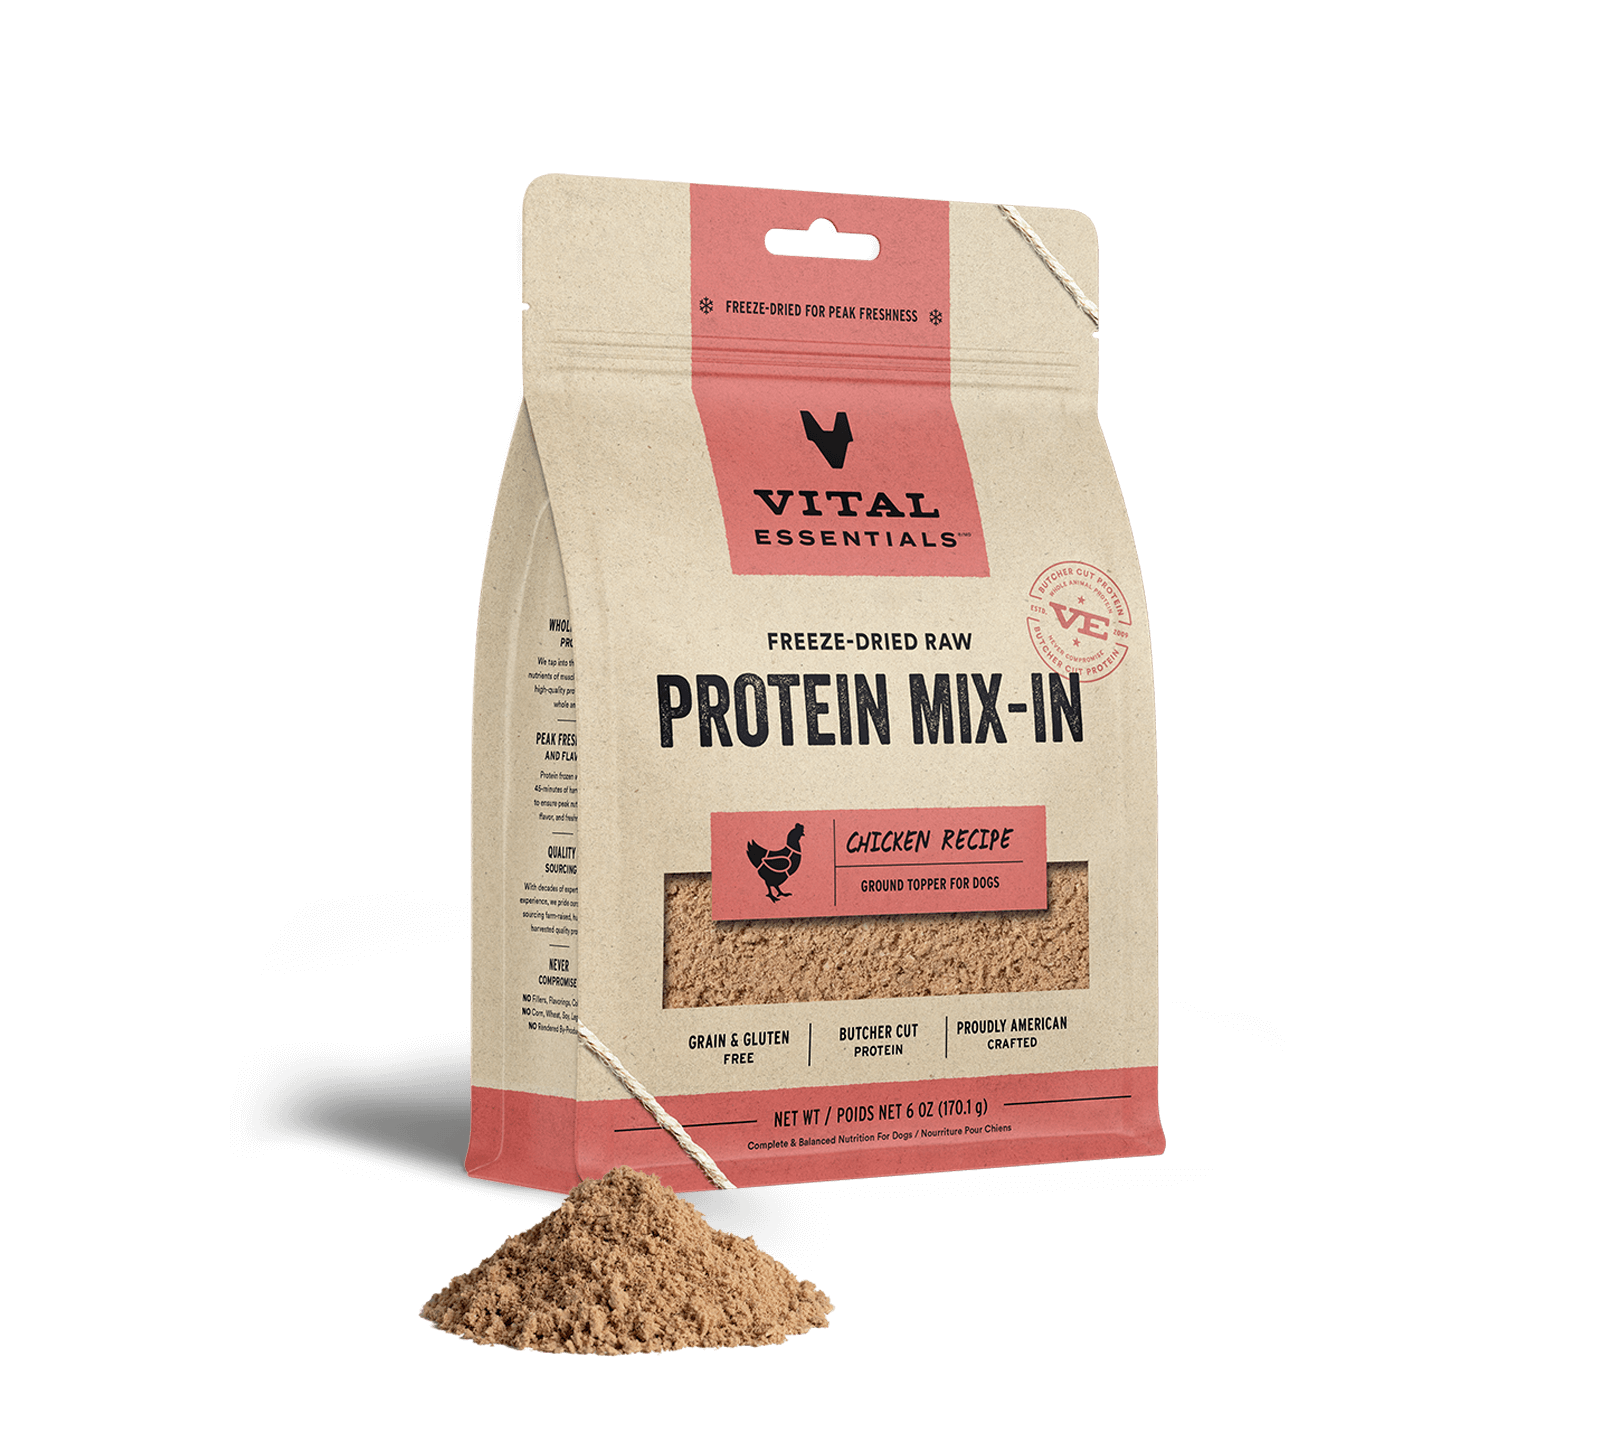 Vital Essentials Freeze-Dried Raw Protein Mix-In Chicken Recipe Ground Topper for Dogs, 6 oz - Healing/First Aid